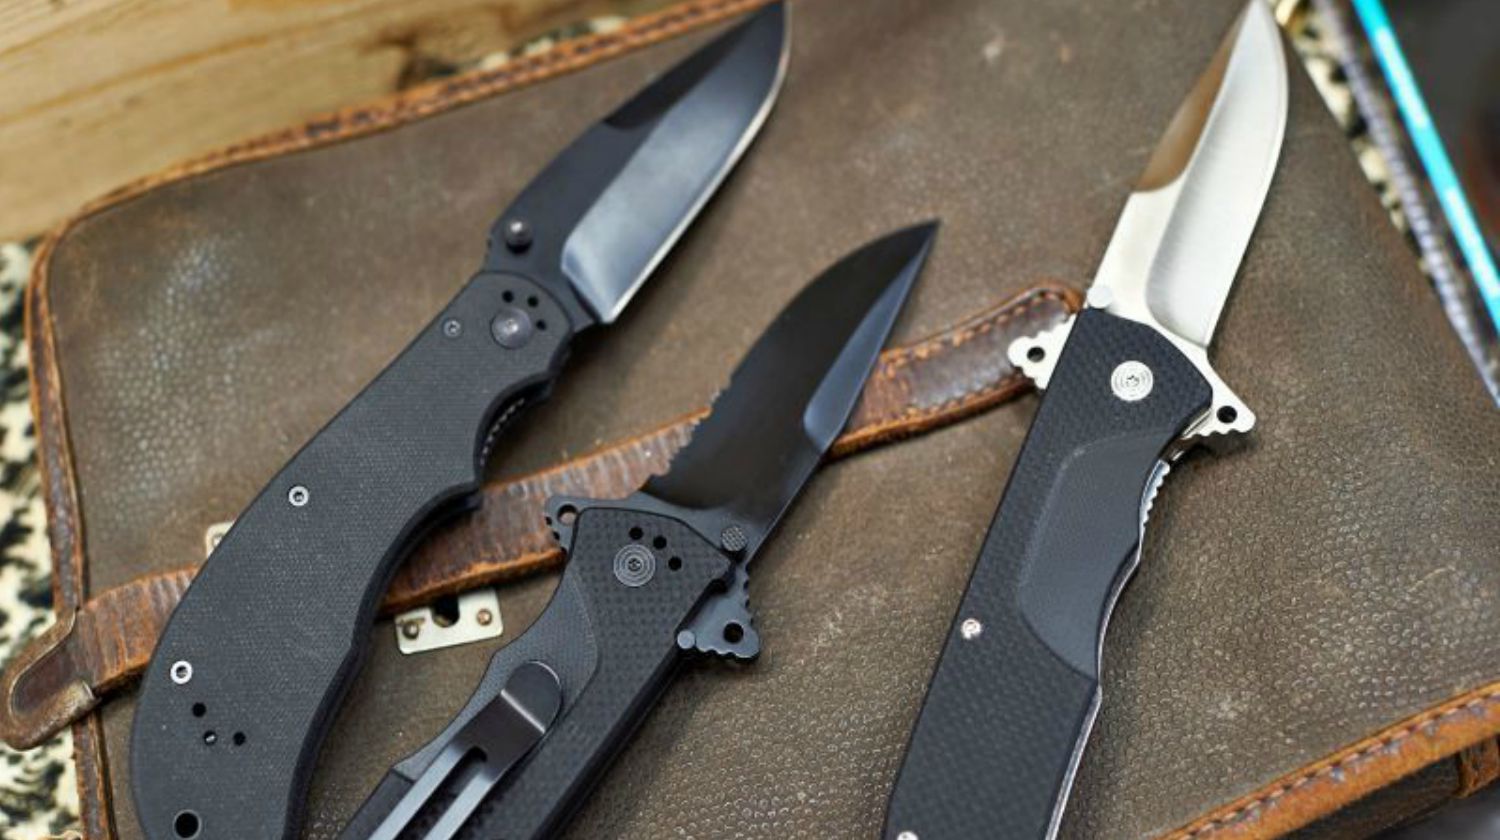 Feature | Three folding knives on top of leather bag | Eye-Catching Folding Hunting Knives